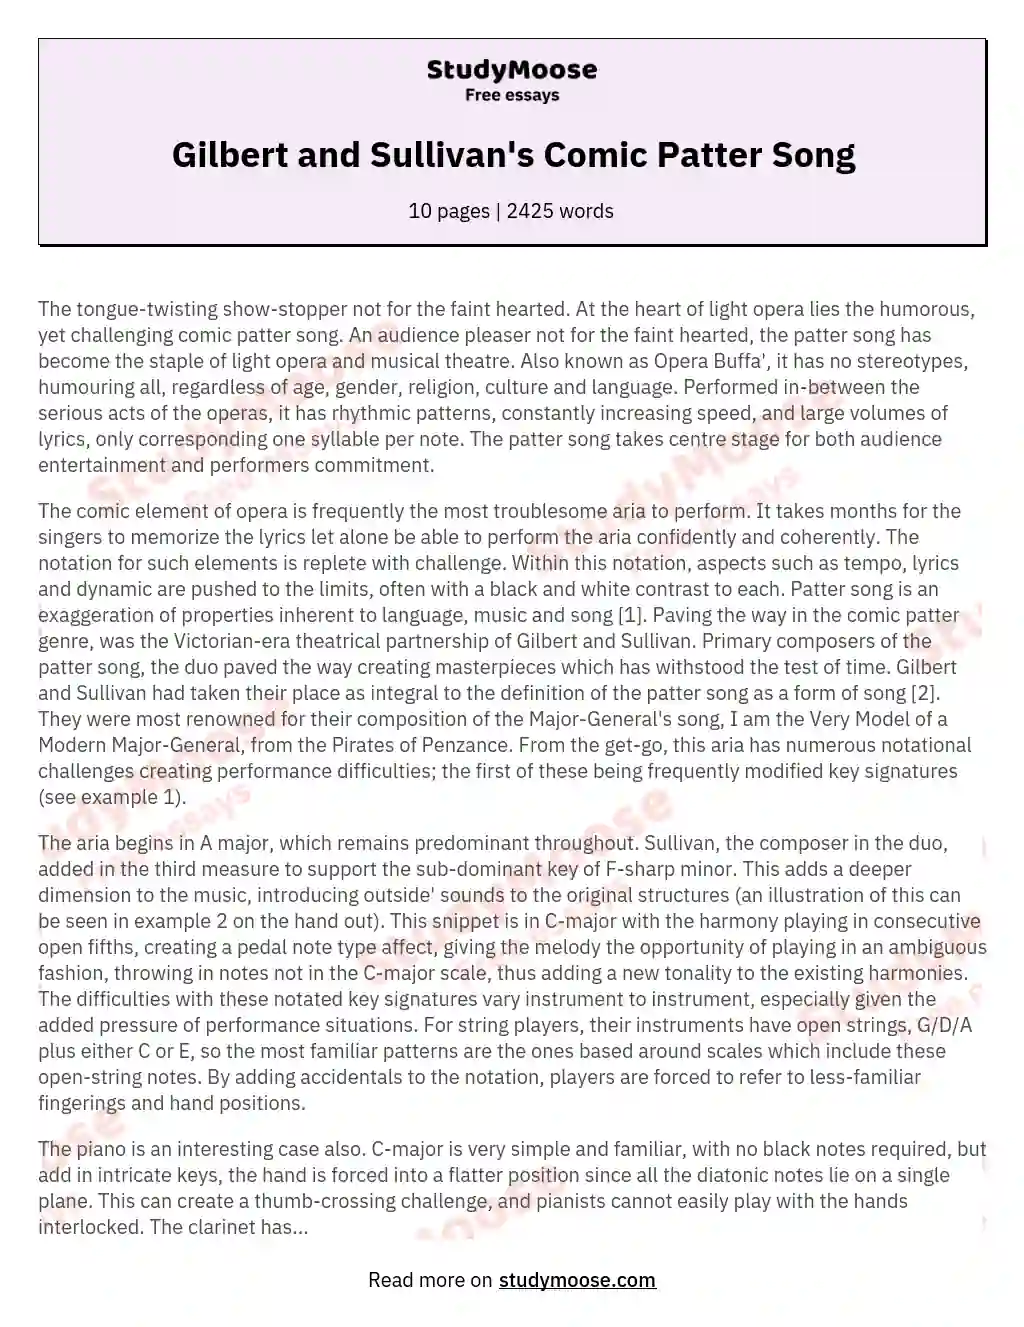 Gilbert and Sullivan's Comic Patter Song essay